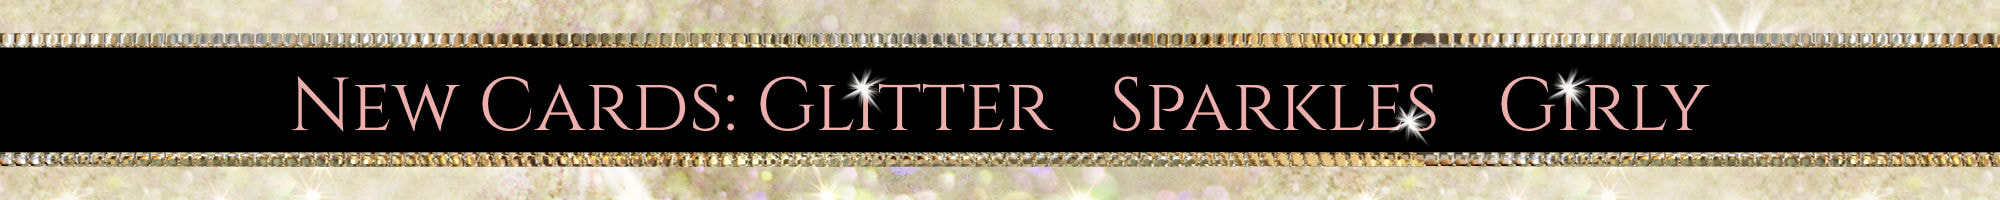 BROWSE ALL GLITZ AND GLAM BUSINESS CARDS AVAILABLE AT ZAZZLE